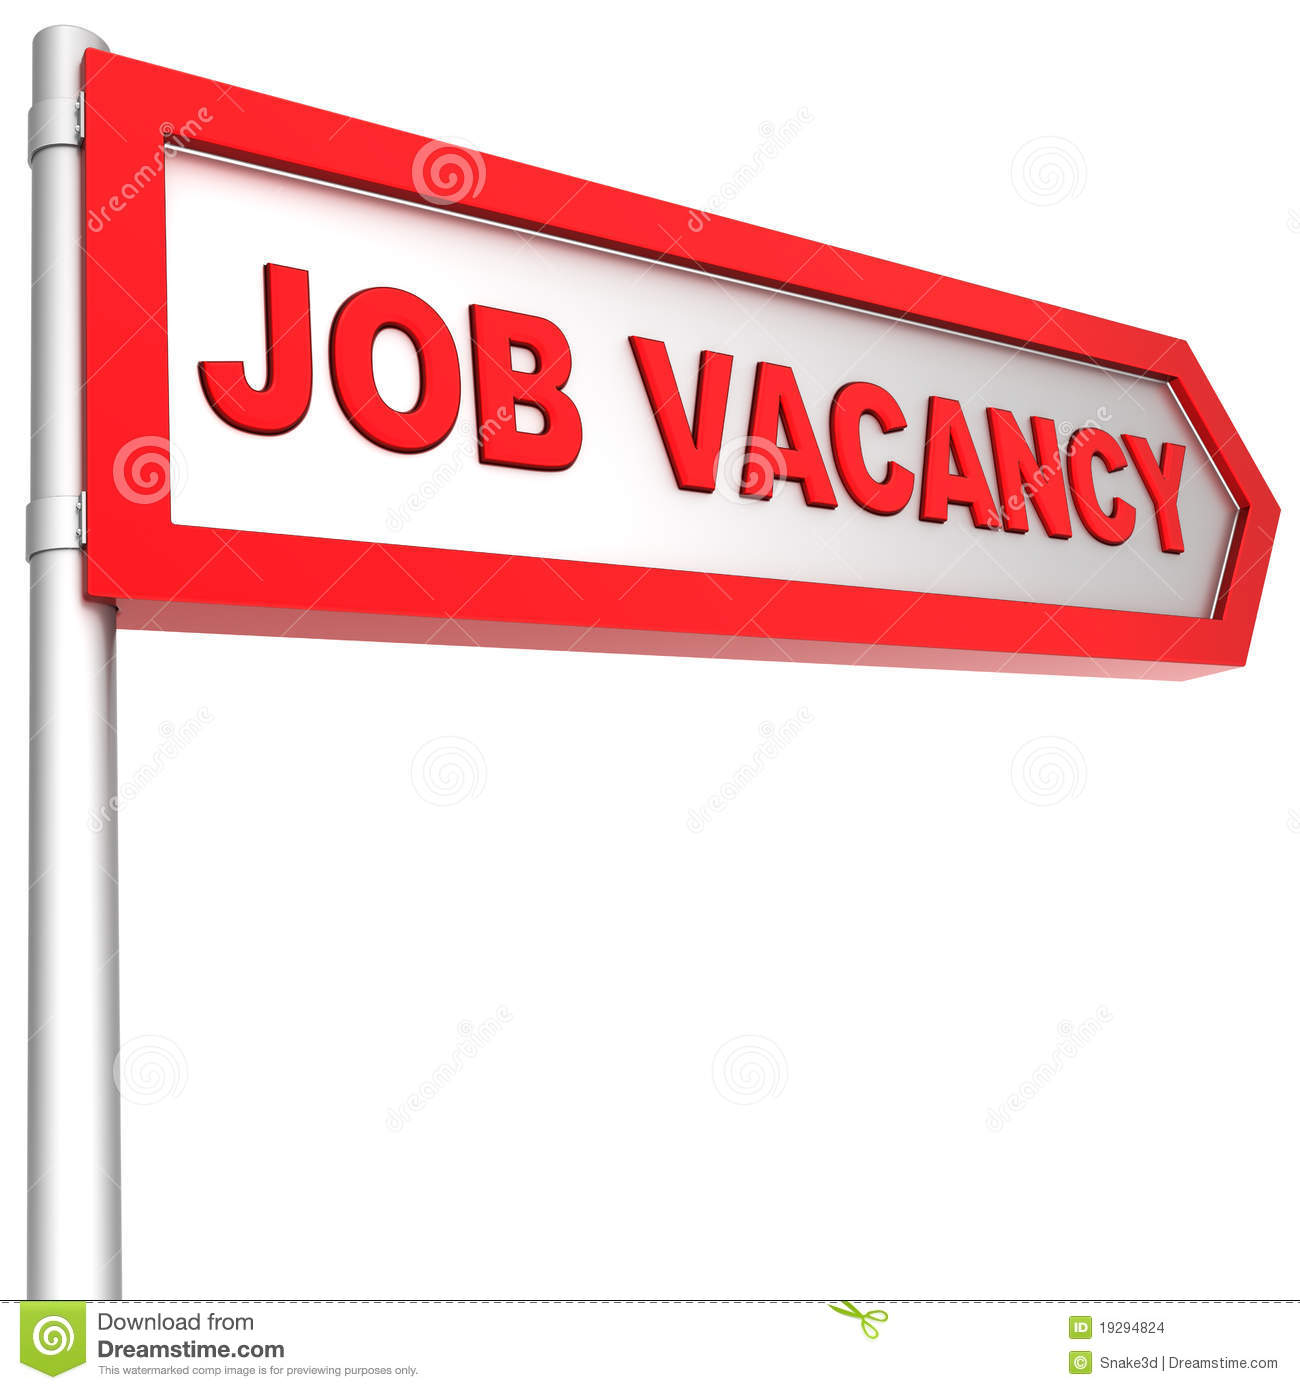 Job Vacancy Searching Road Sign  Looking For A Work Concept  This Is A